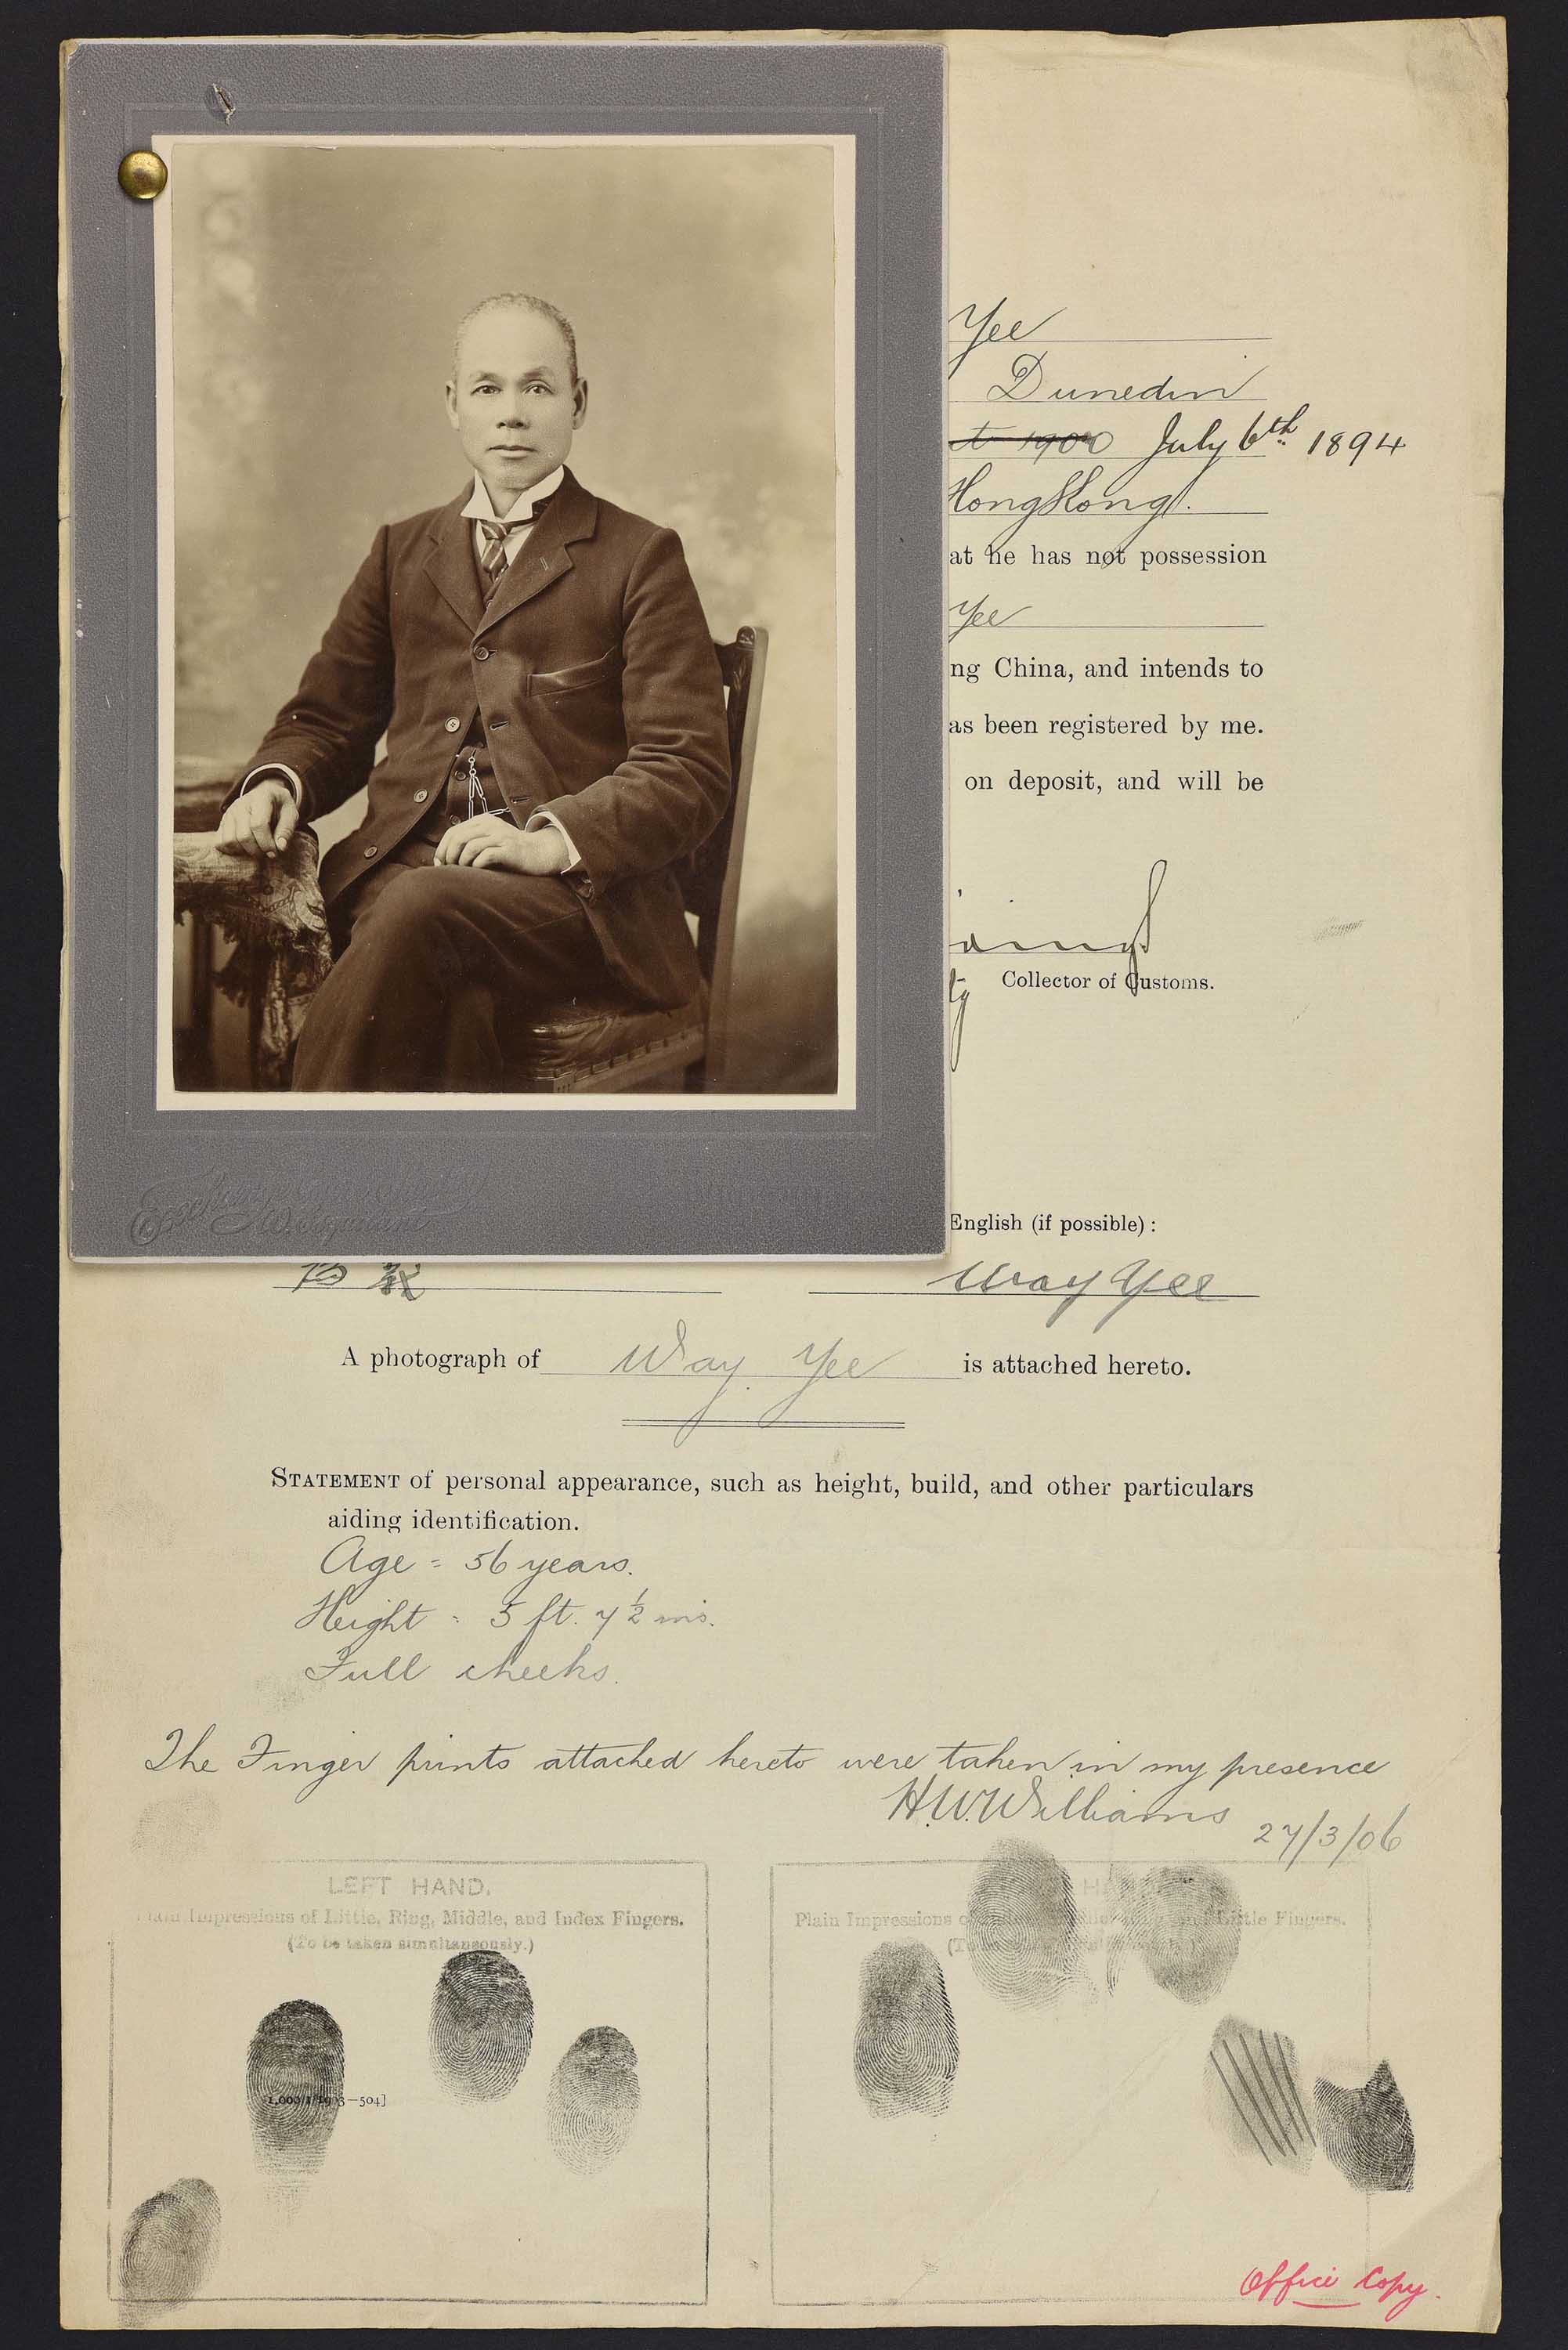 Sepia photo of a seated Chinese man attached to his immigration papers.